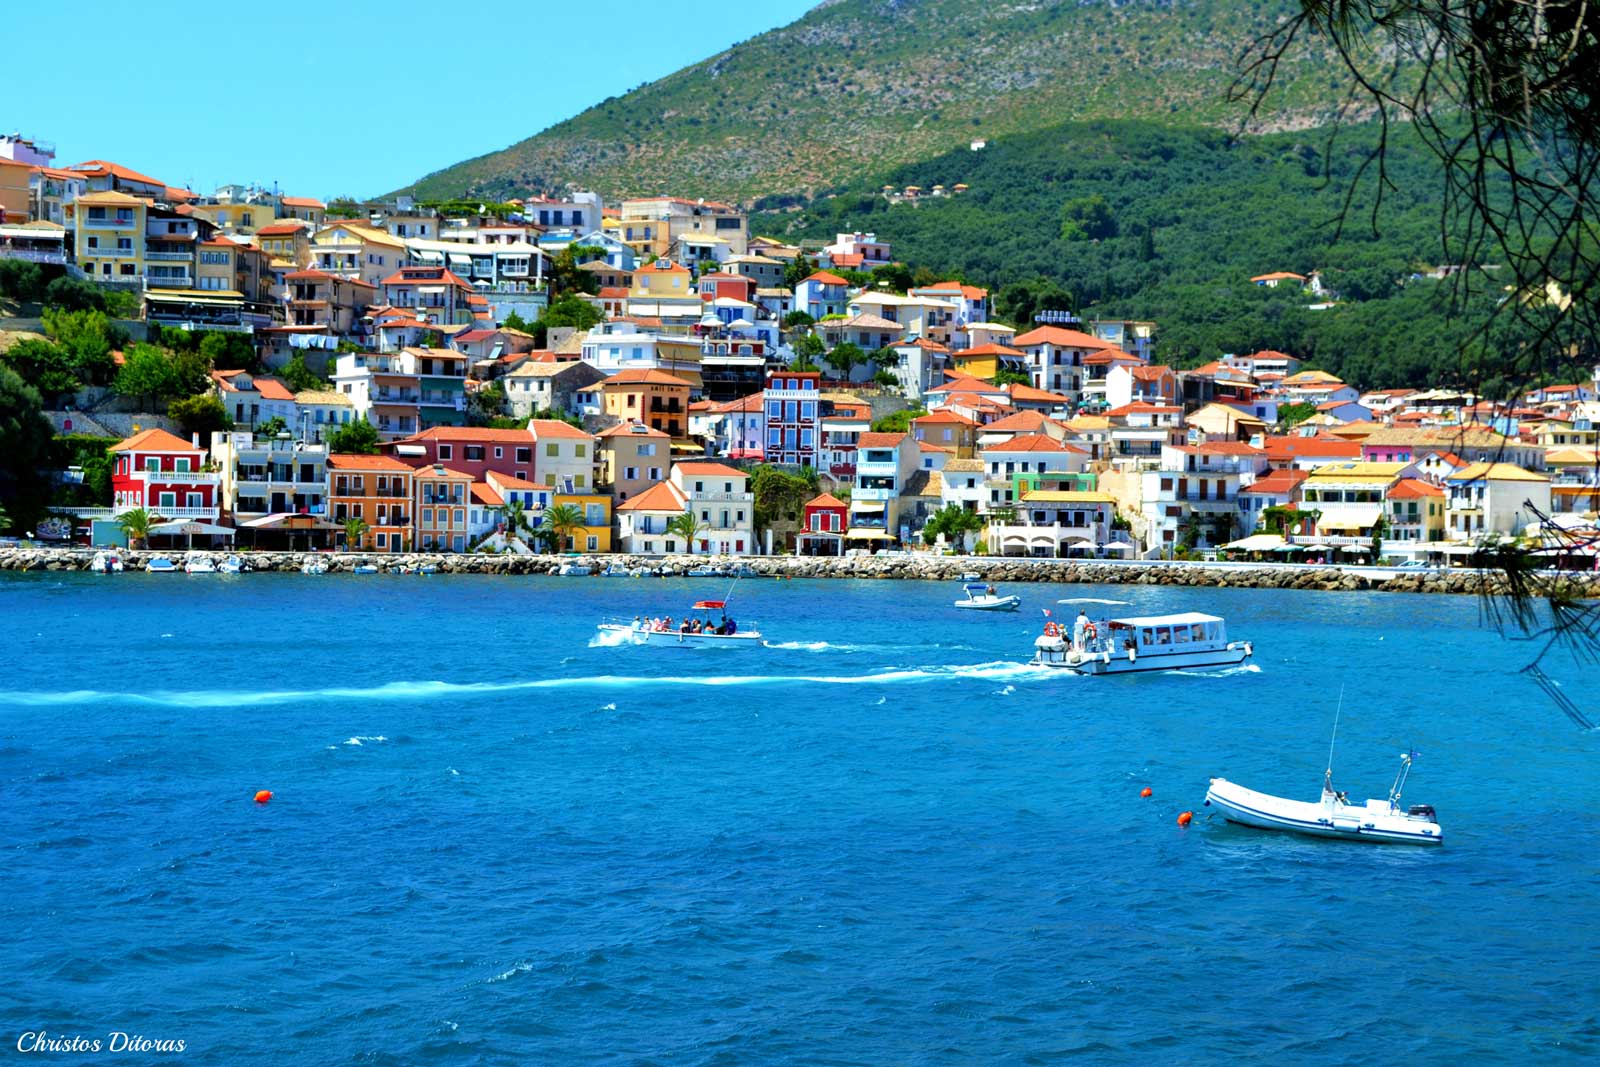 A scenic view of Parga, a picturesque town with colorful buildings nestled by the sea.